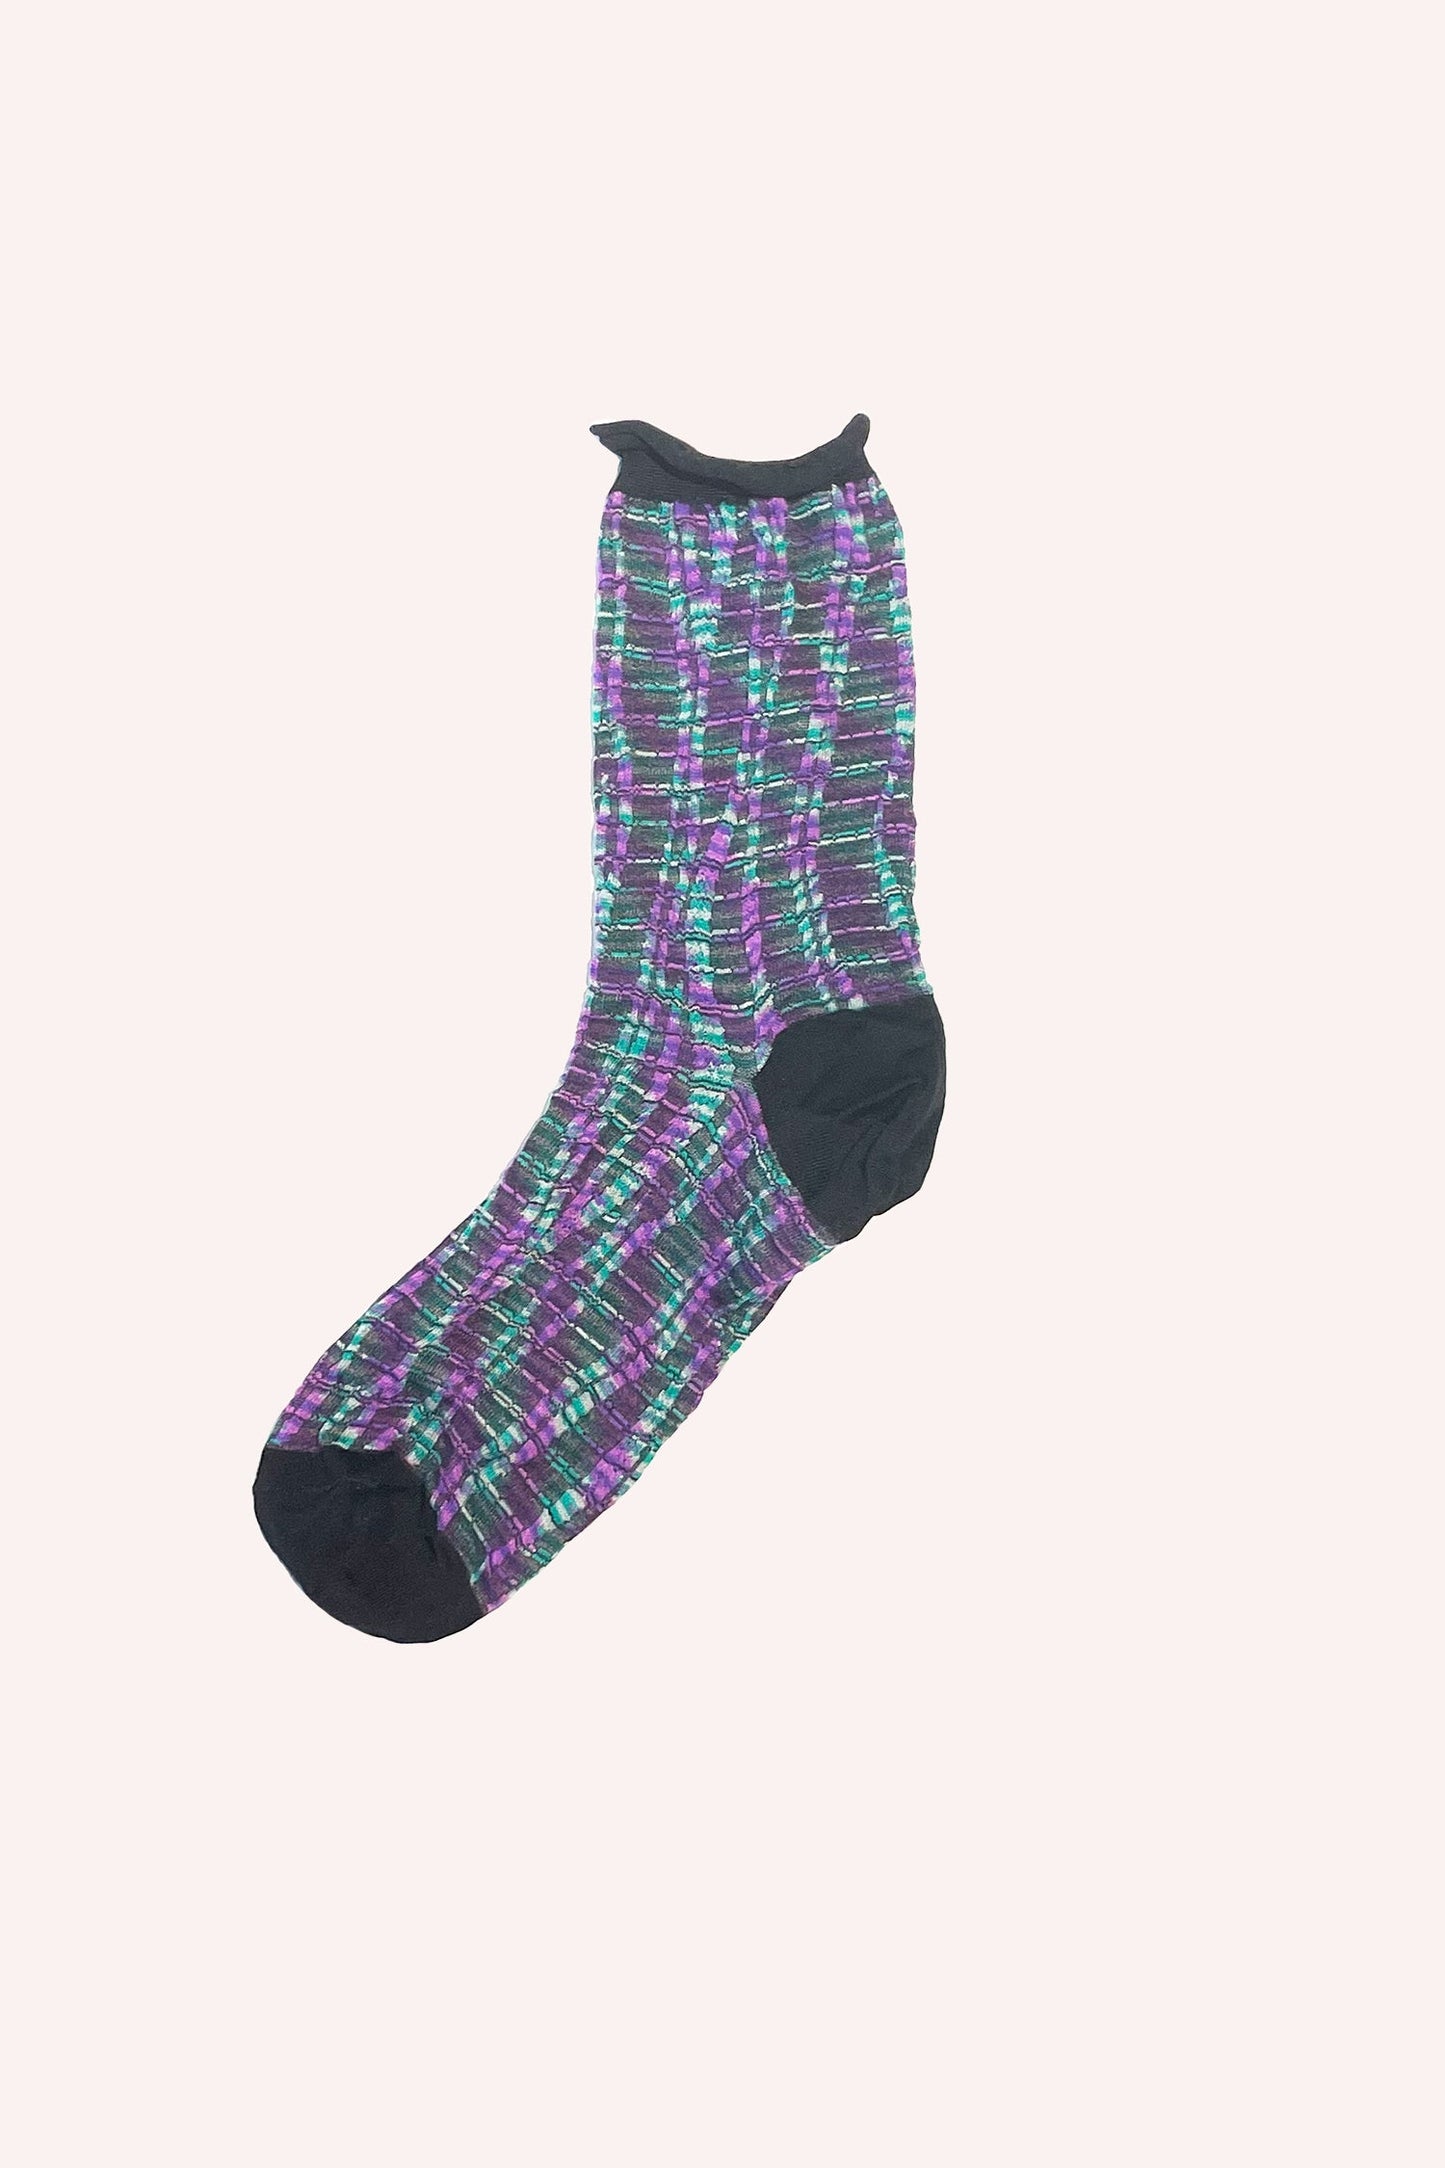 Sock Blue Multi the front, heels, and top in black, lines top to bottom of dark blue/pink on lighter 